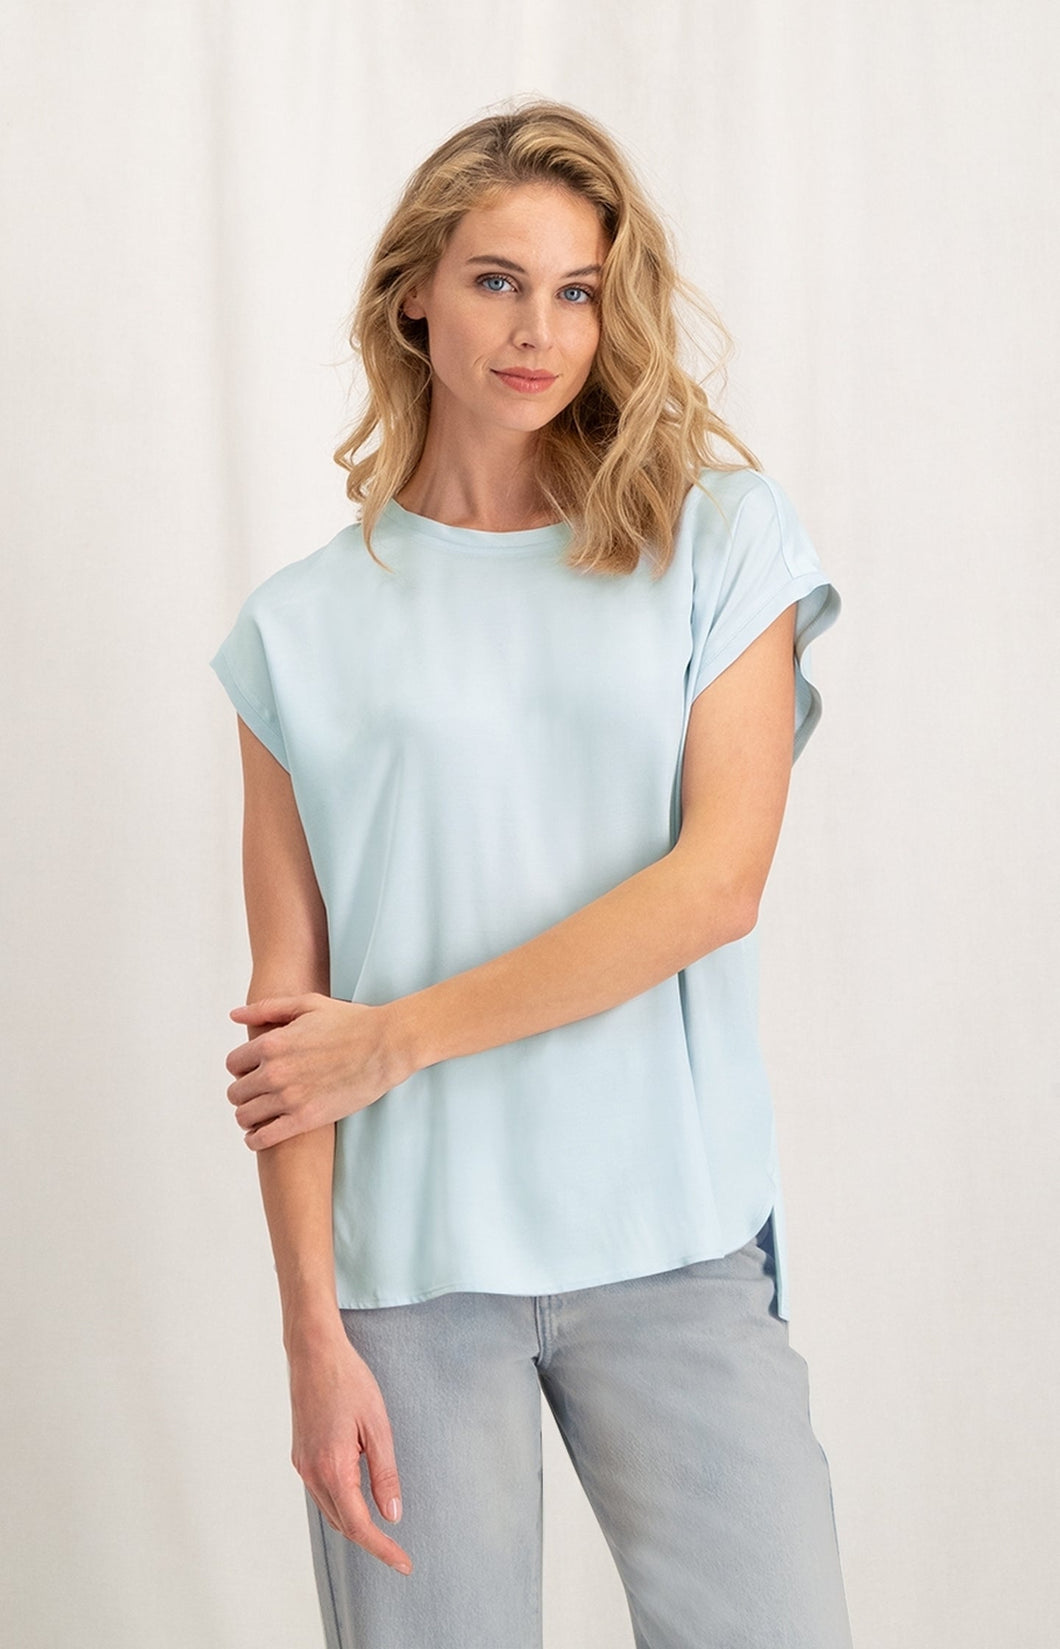 Sleeveless top with round neck in fabrix mix - Plein Air Blue